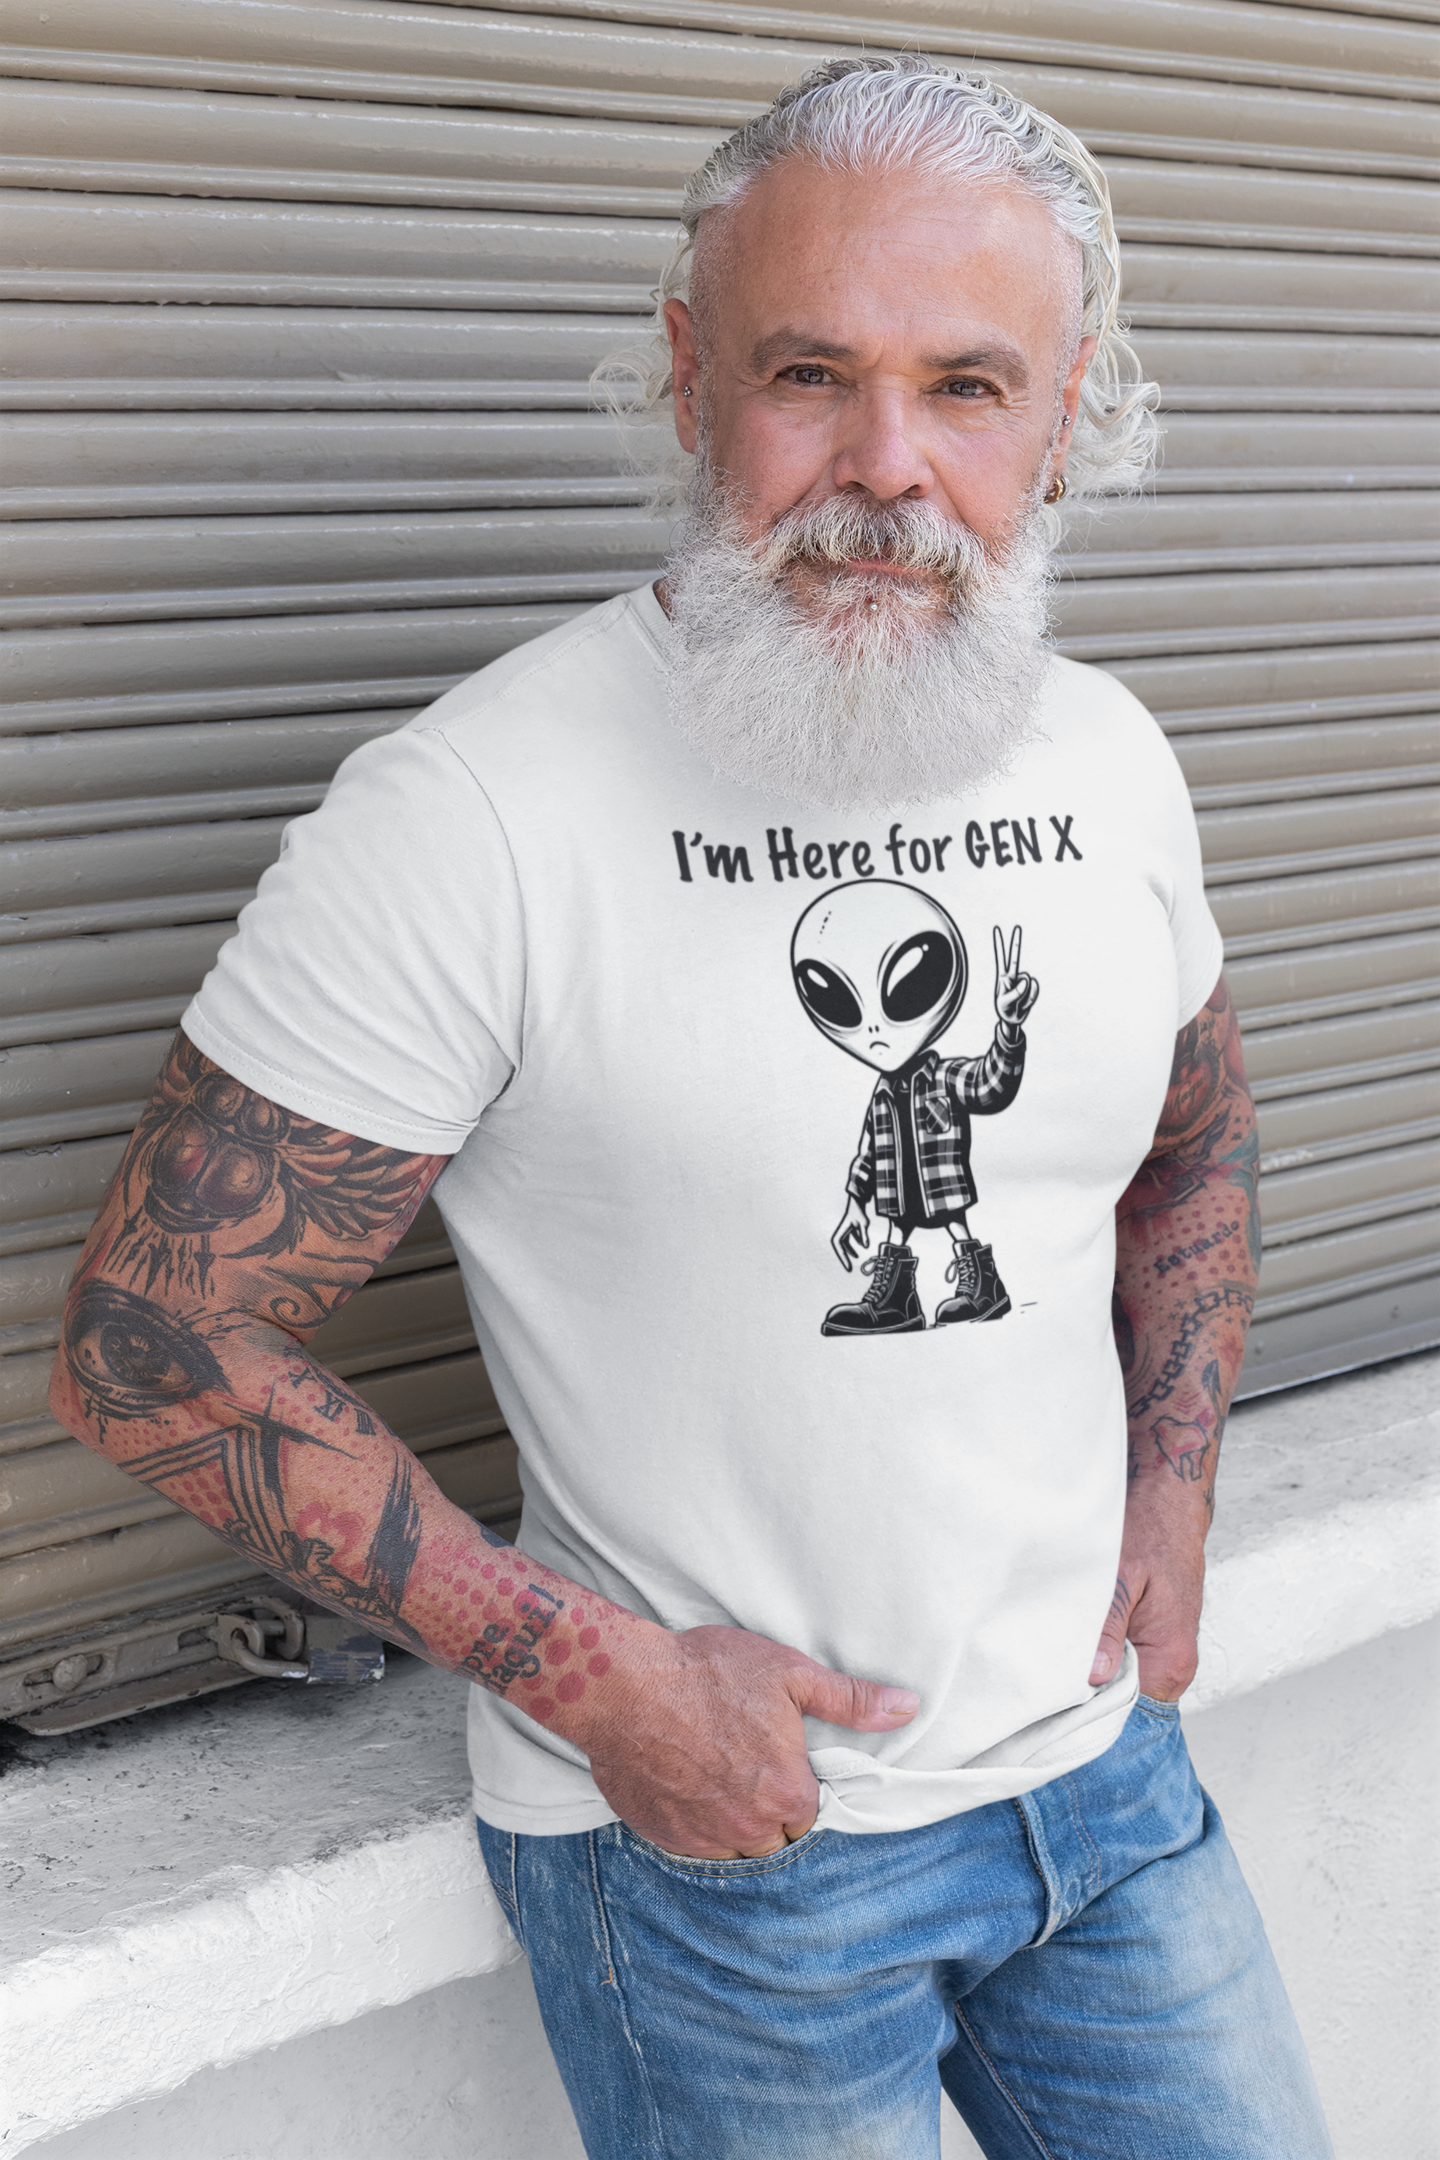 Are you a proud member of Generation X, the generation that grew up with minimal adult supervision? Do you identify with the grunge music scene, the critical thinking attitude, and the enterprising spirit of your peers? If so, you might like this T-shirt that features an alien with combat boots and a flannel shirt, flashing a peace sign, saying “I’m here for Gen X”. 